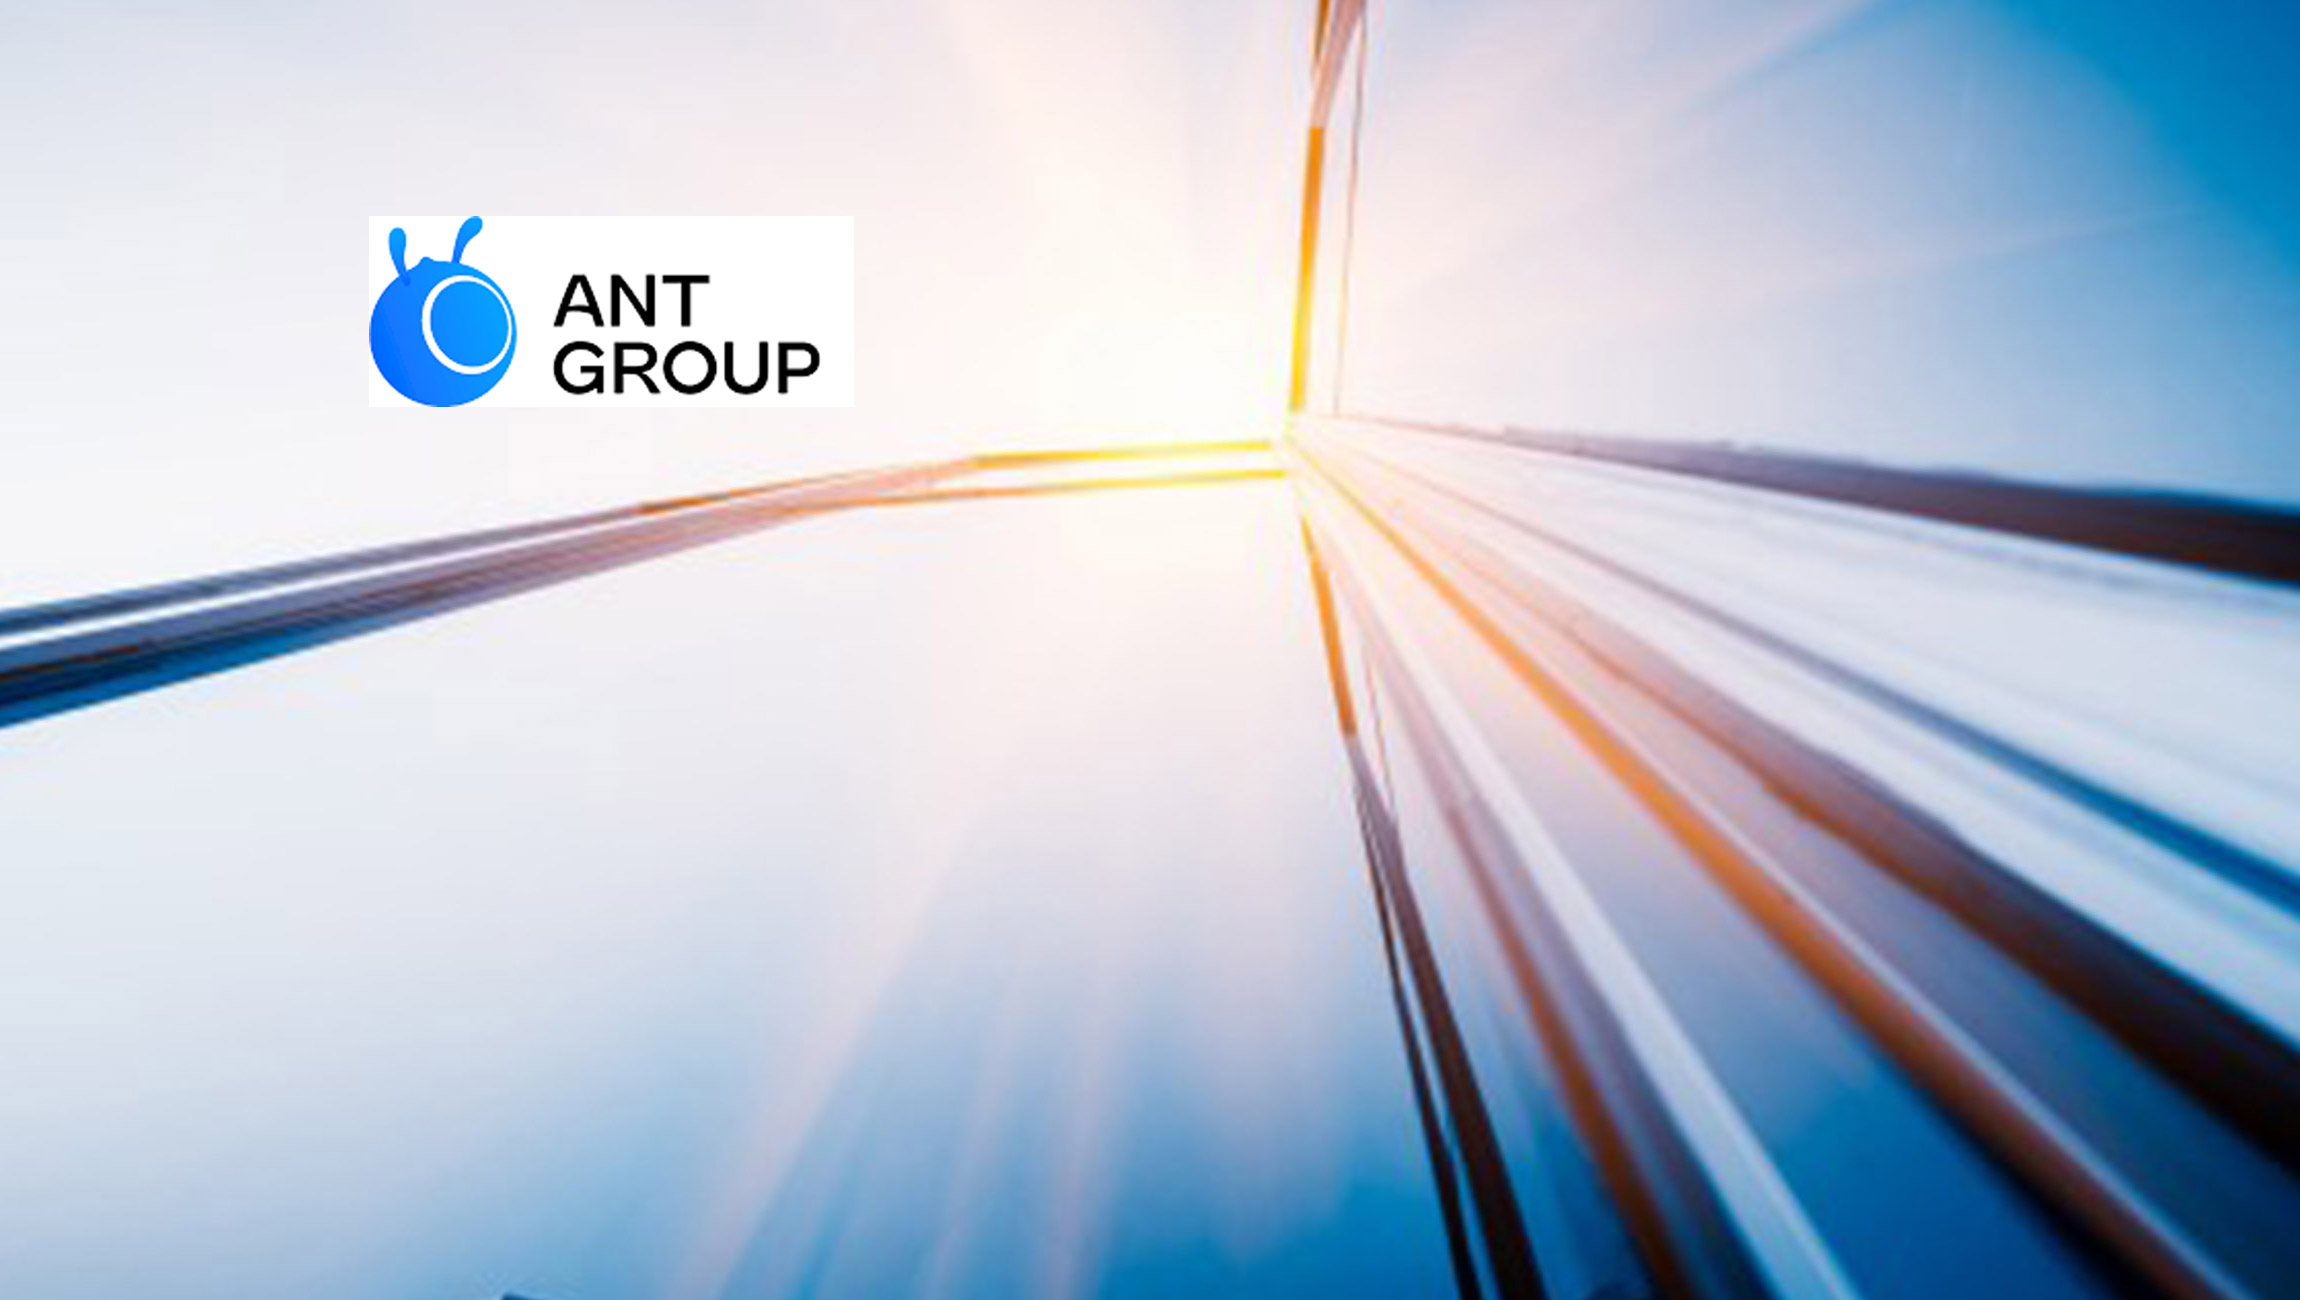 Ant Group Achieves Carbon Neutrality in Its Own Operations With Green Computing Technologies Driving Indirect Emission Cuts